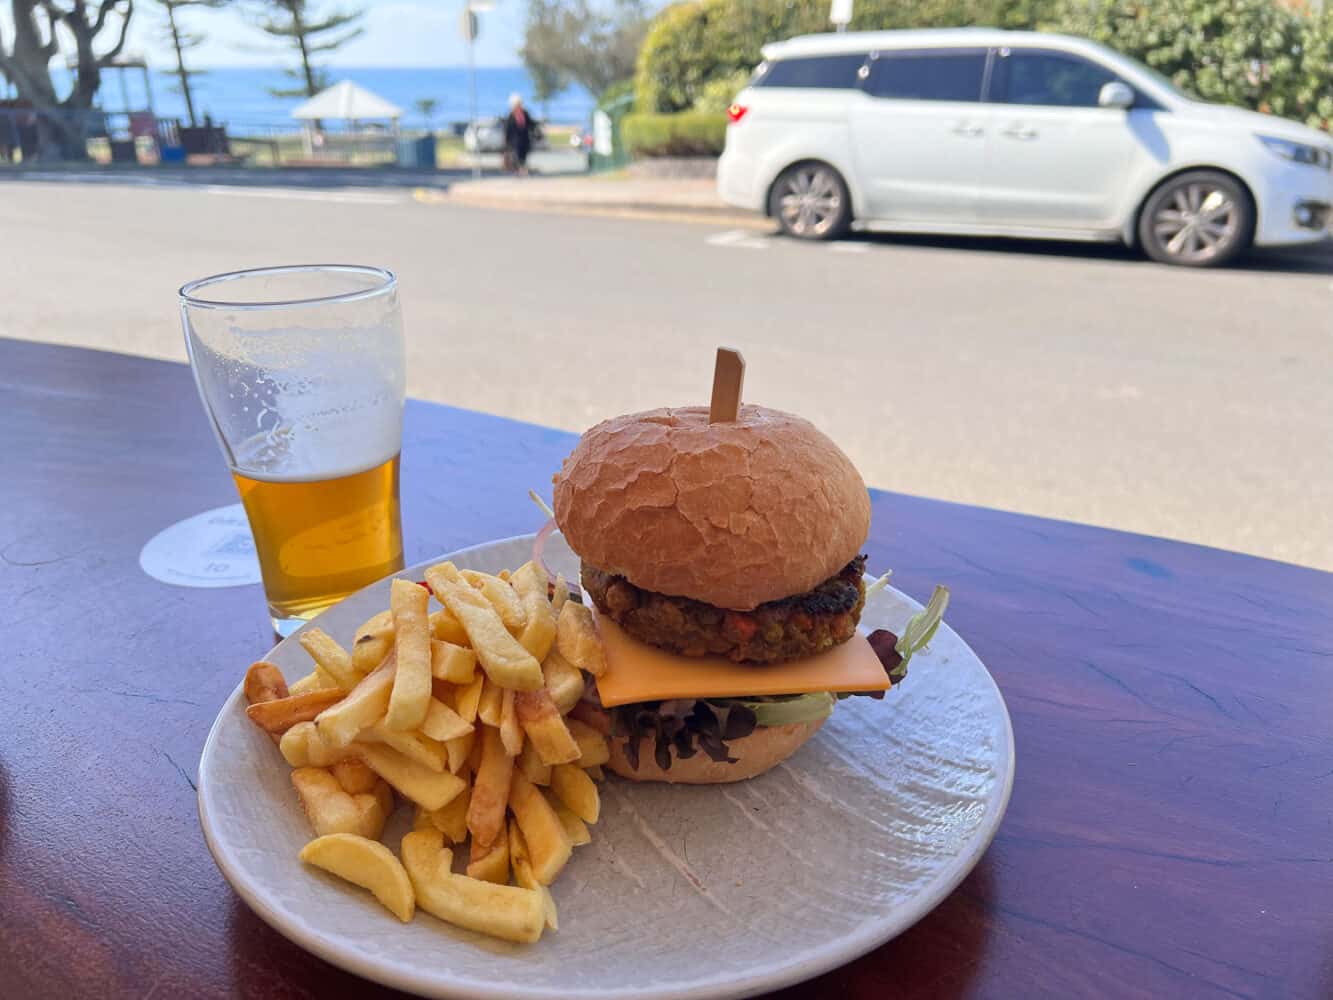 Lentil and chickpea burger with chips and beer, Moffat Beach Brewing Co, Caloundra, Queensland, Australia
